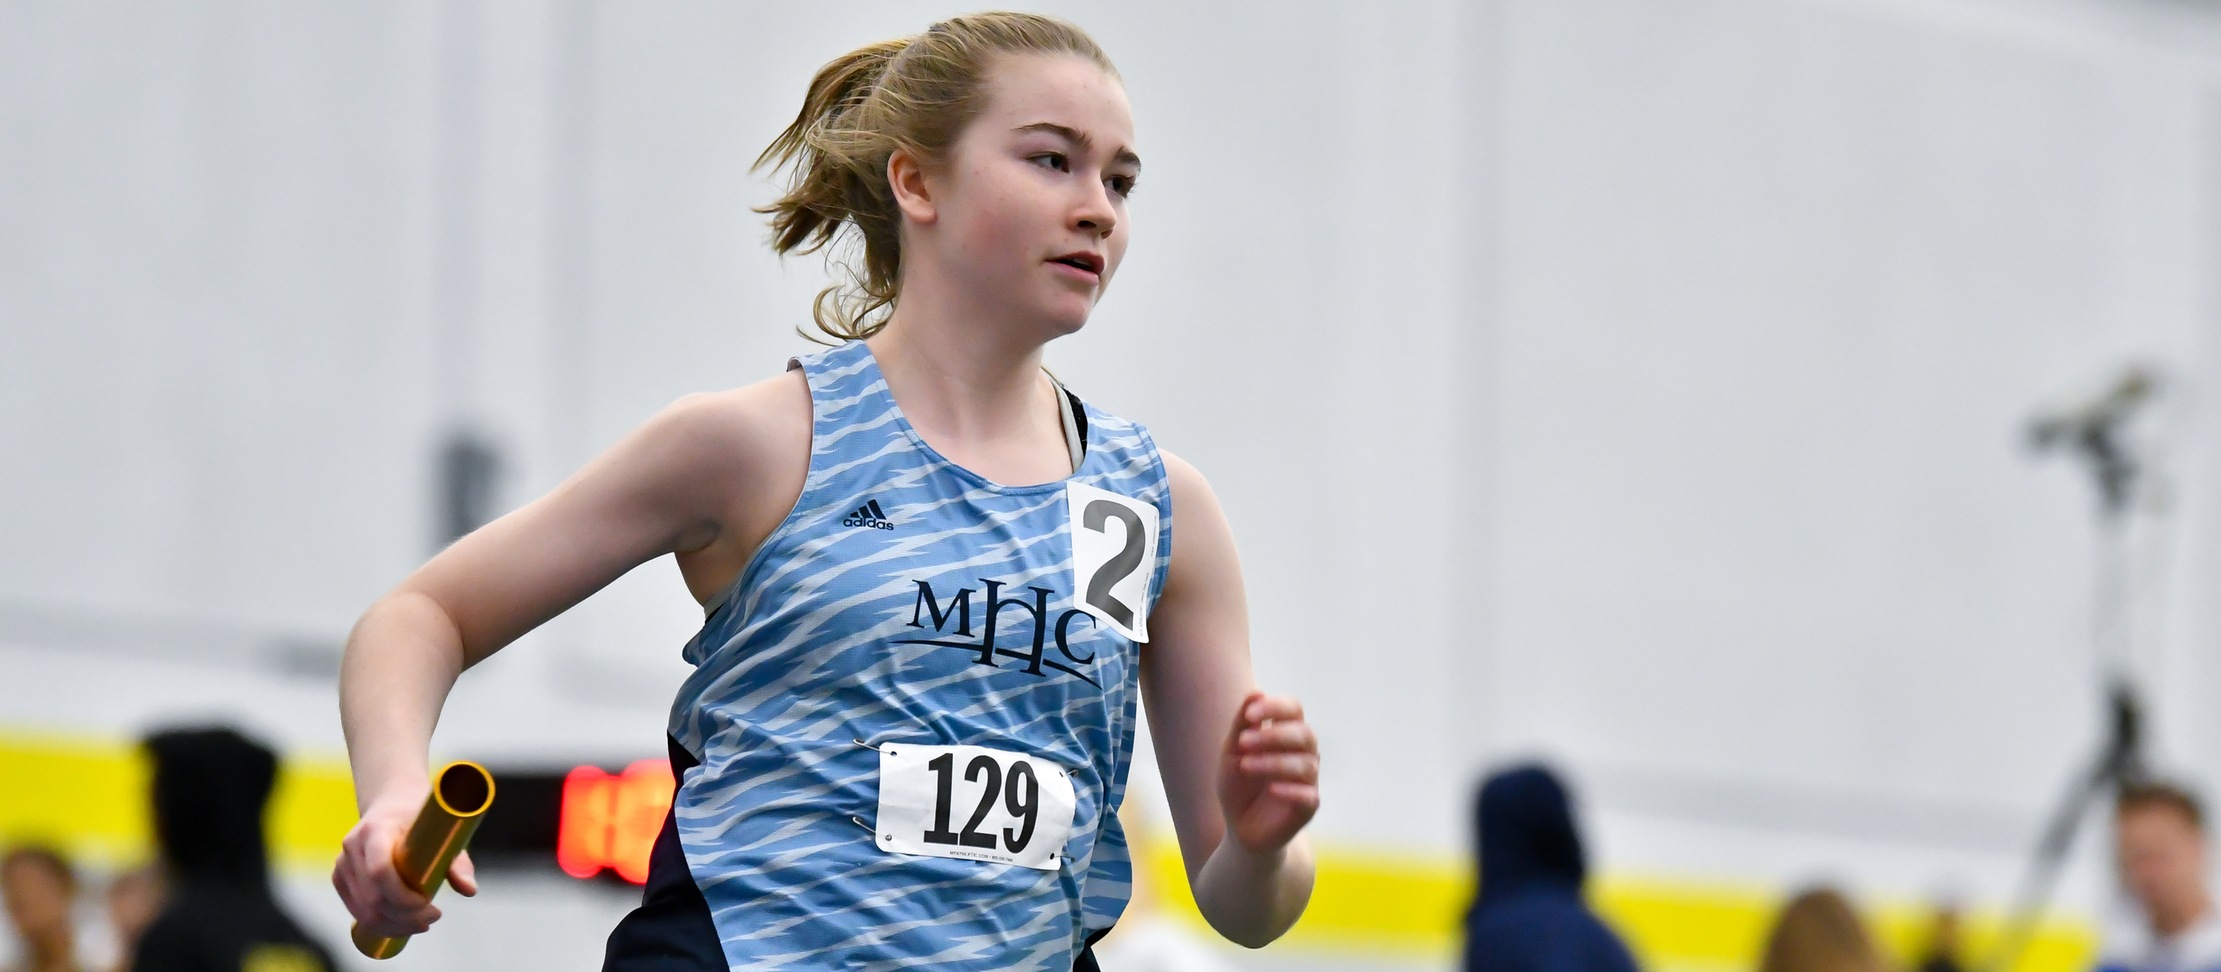 Track and Field Shines at Boston University and MIT This Weekend